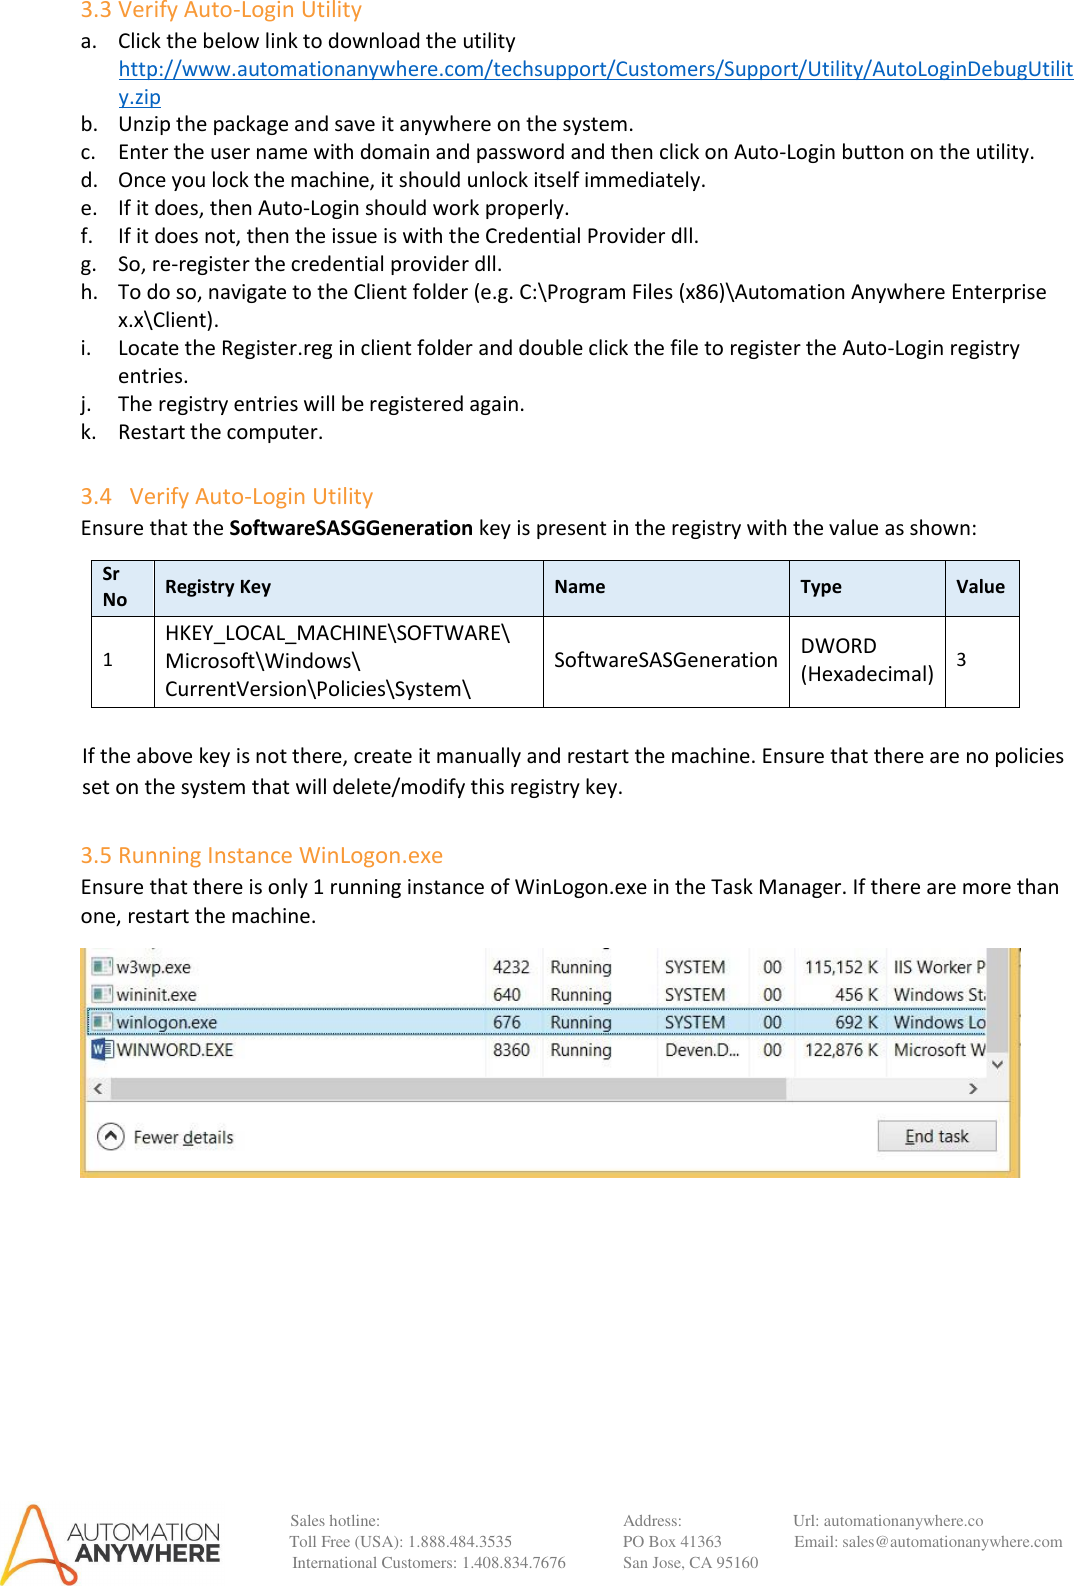 Page 9 of 11 - AAE Auto Login Best Practice Troubleshooting Guide[1]